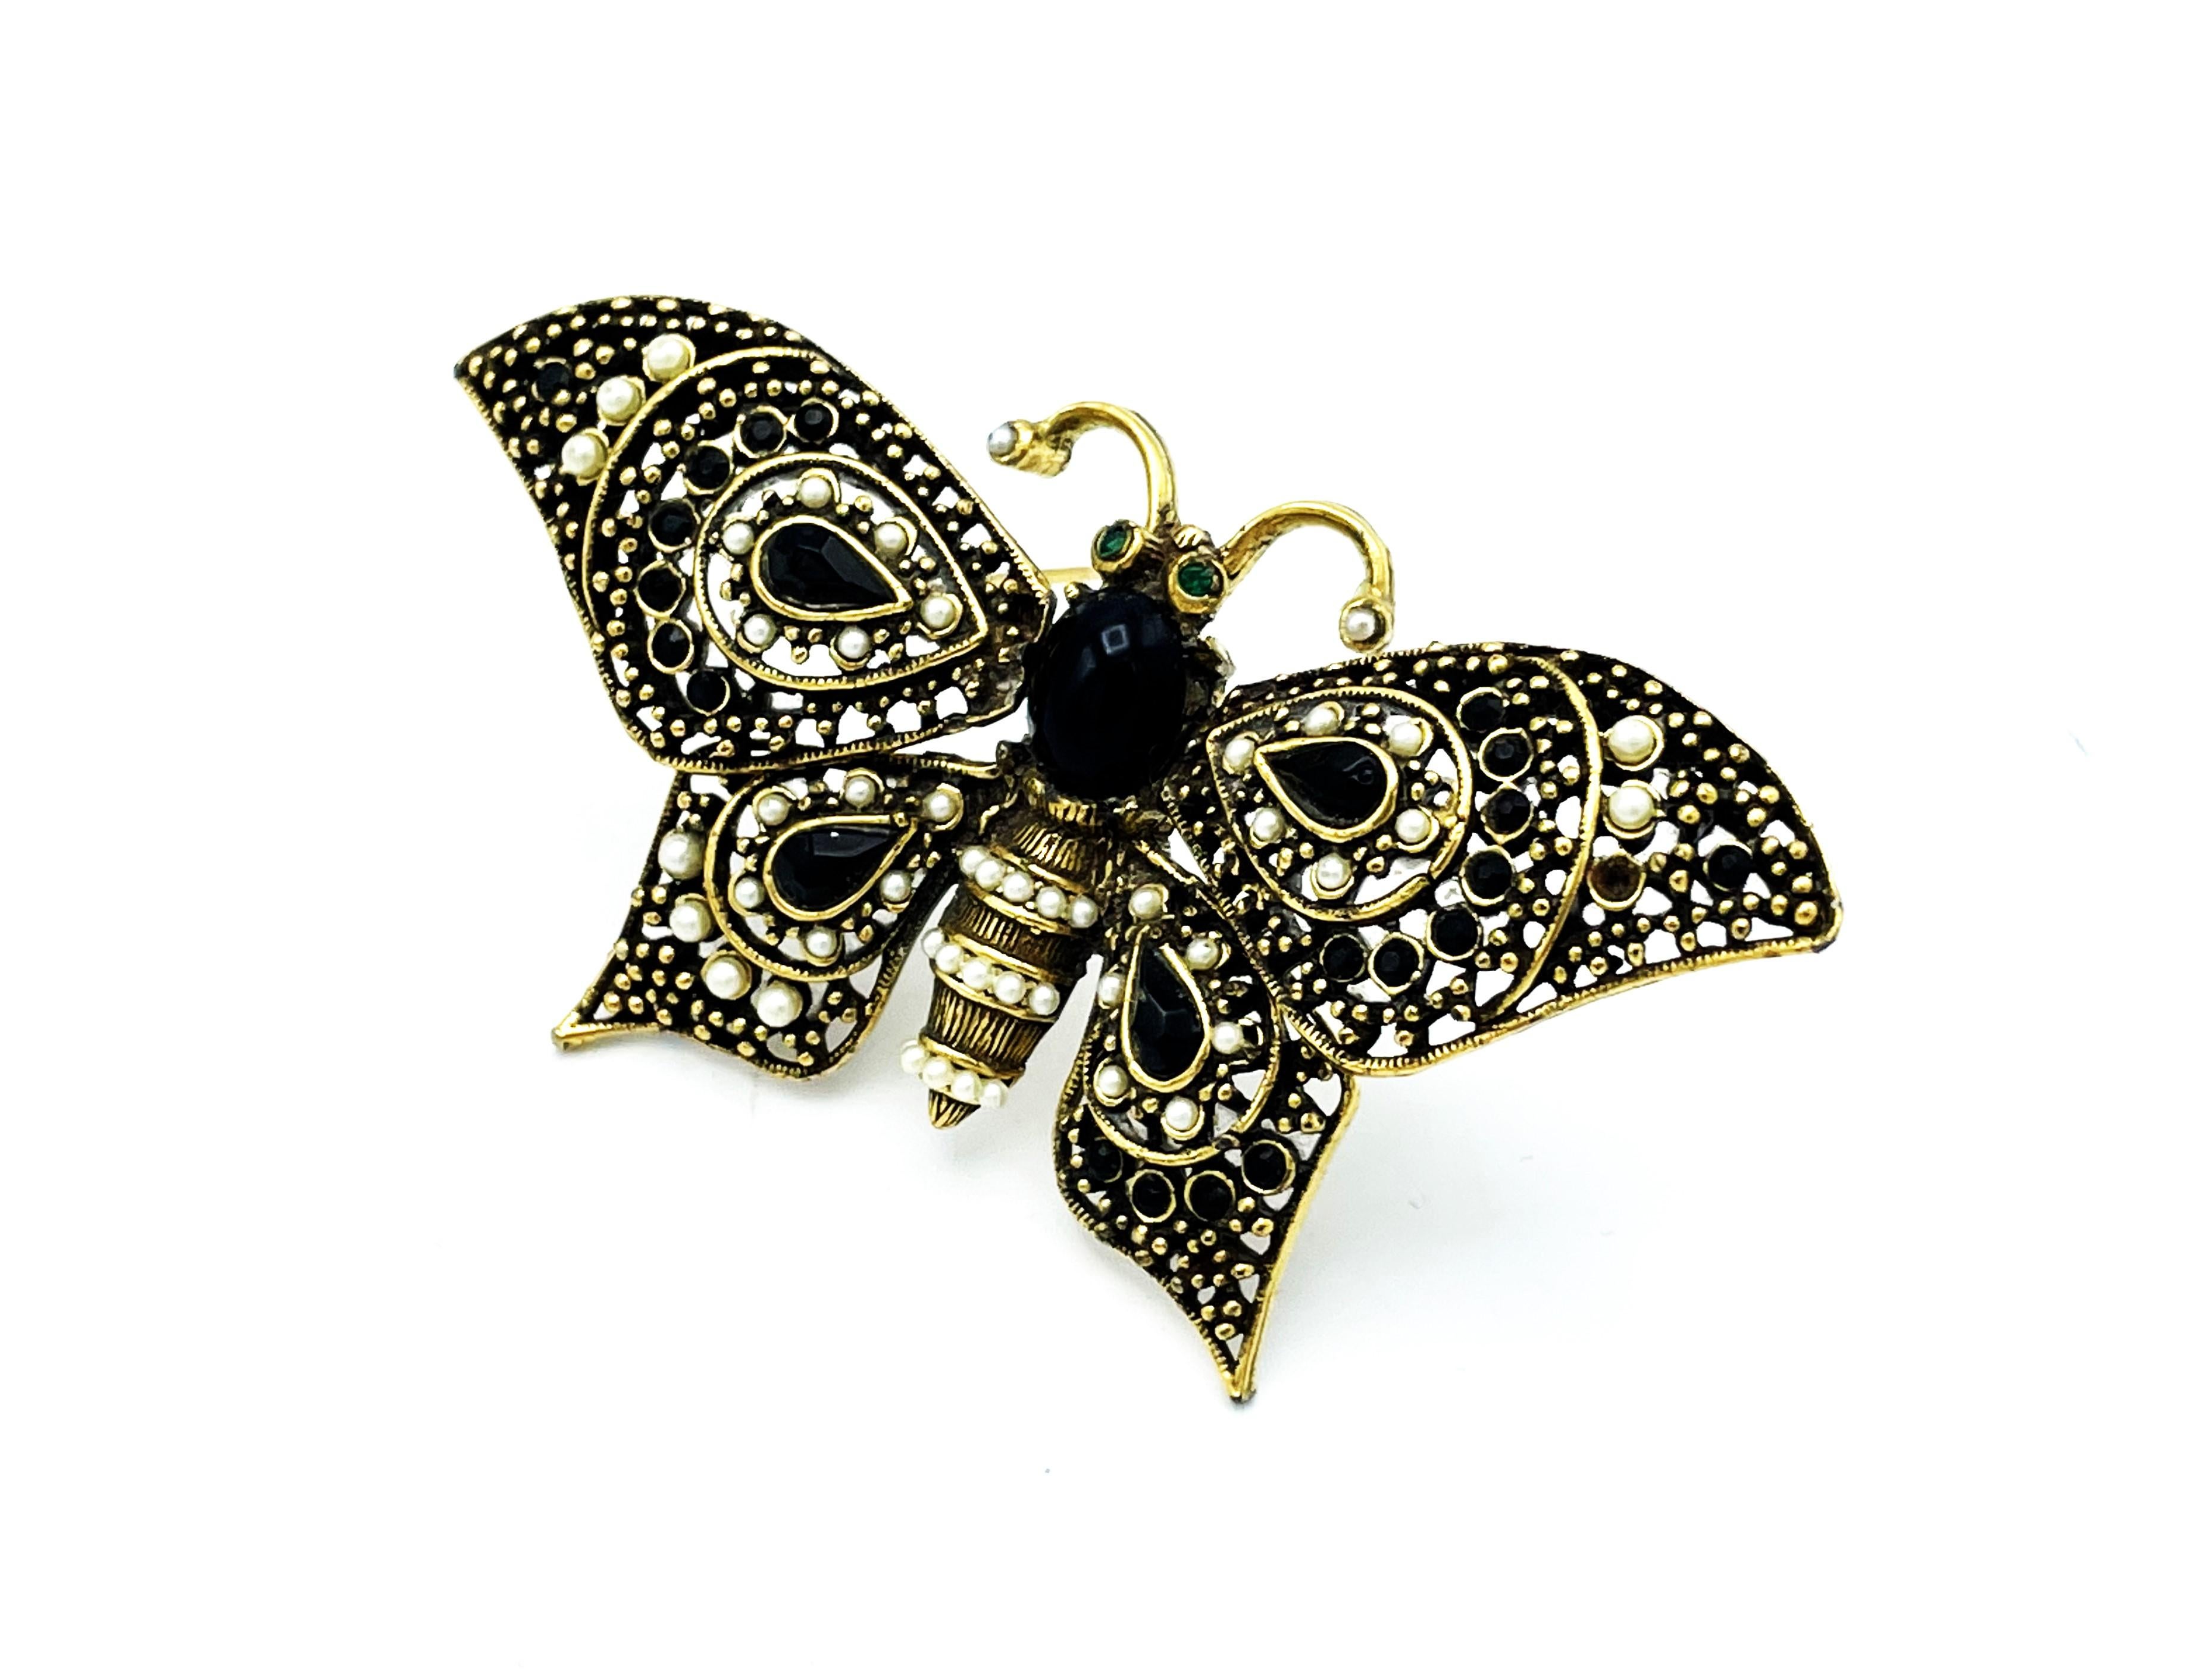 Butterfly brooch with moving wings - TREMPLER - signed Pauline Rader USA in black enamel with many small pearls.  

Measurement:
Wight of the larg wings 7 cm - the small wings 4 cm wight, the body of the butterfly 3 cm 

Features:
- Signed PAULINE